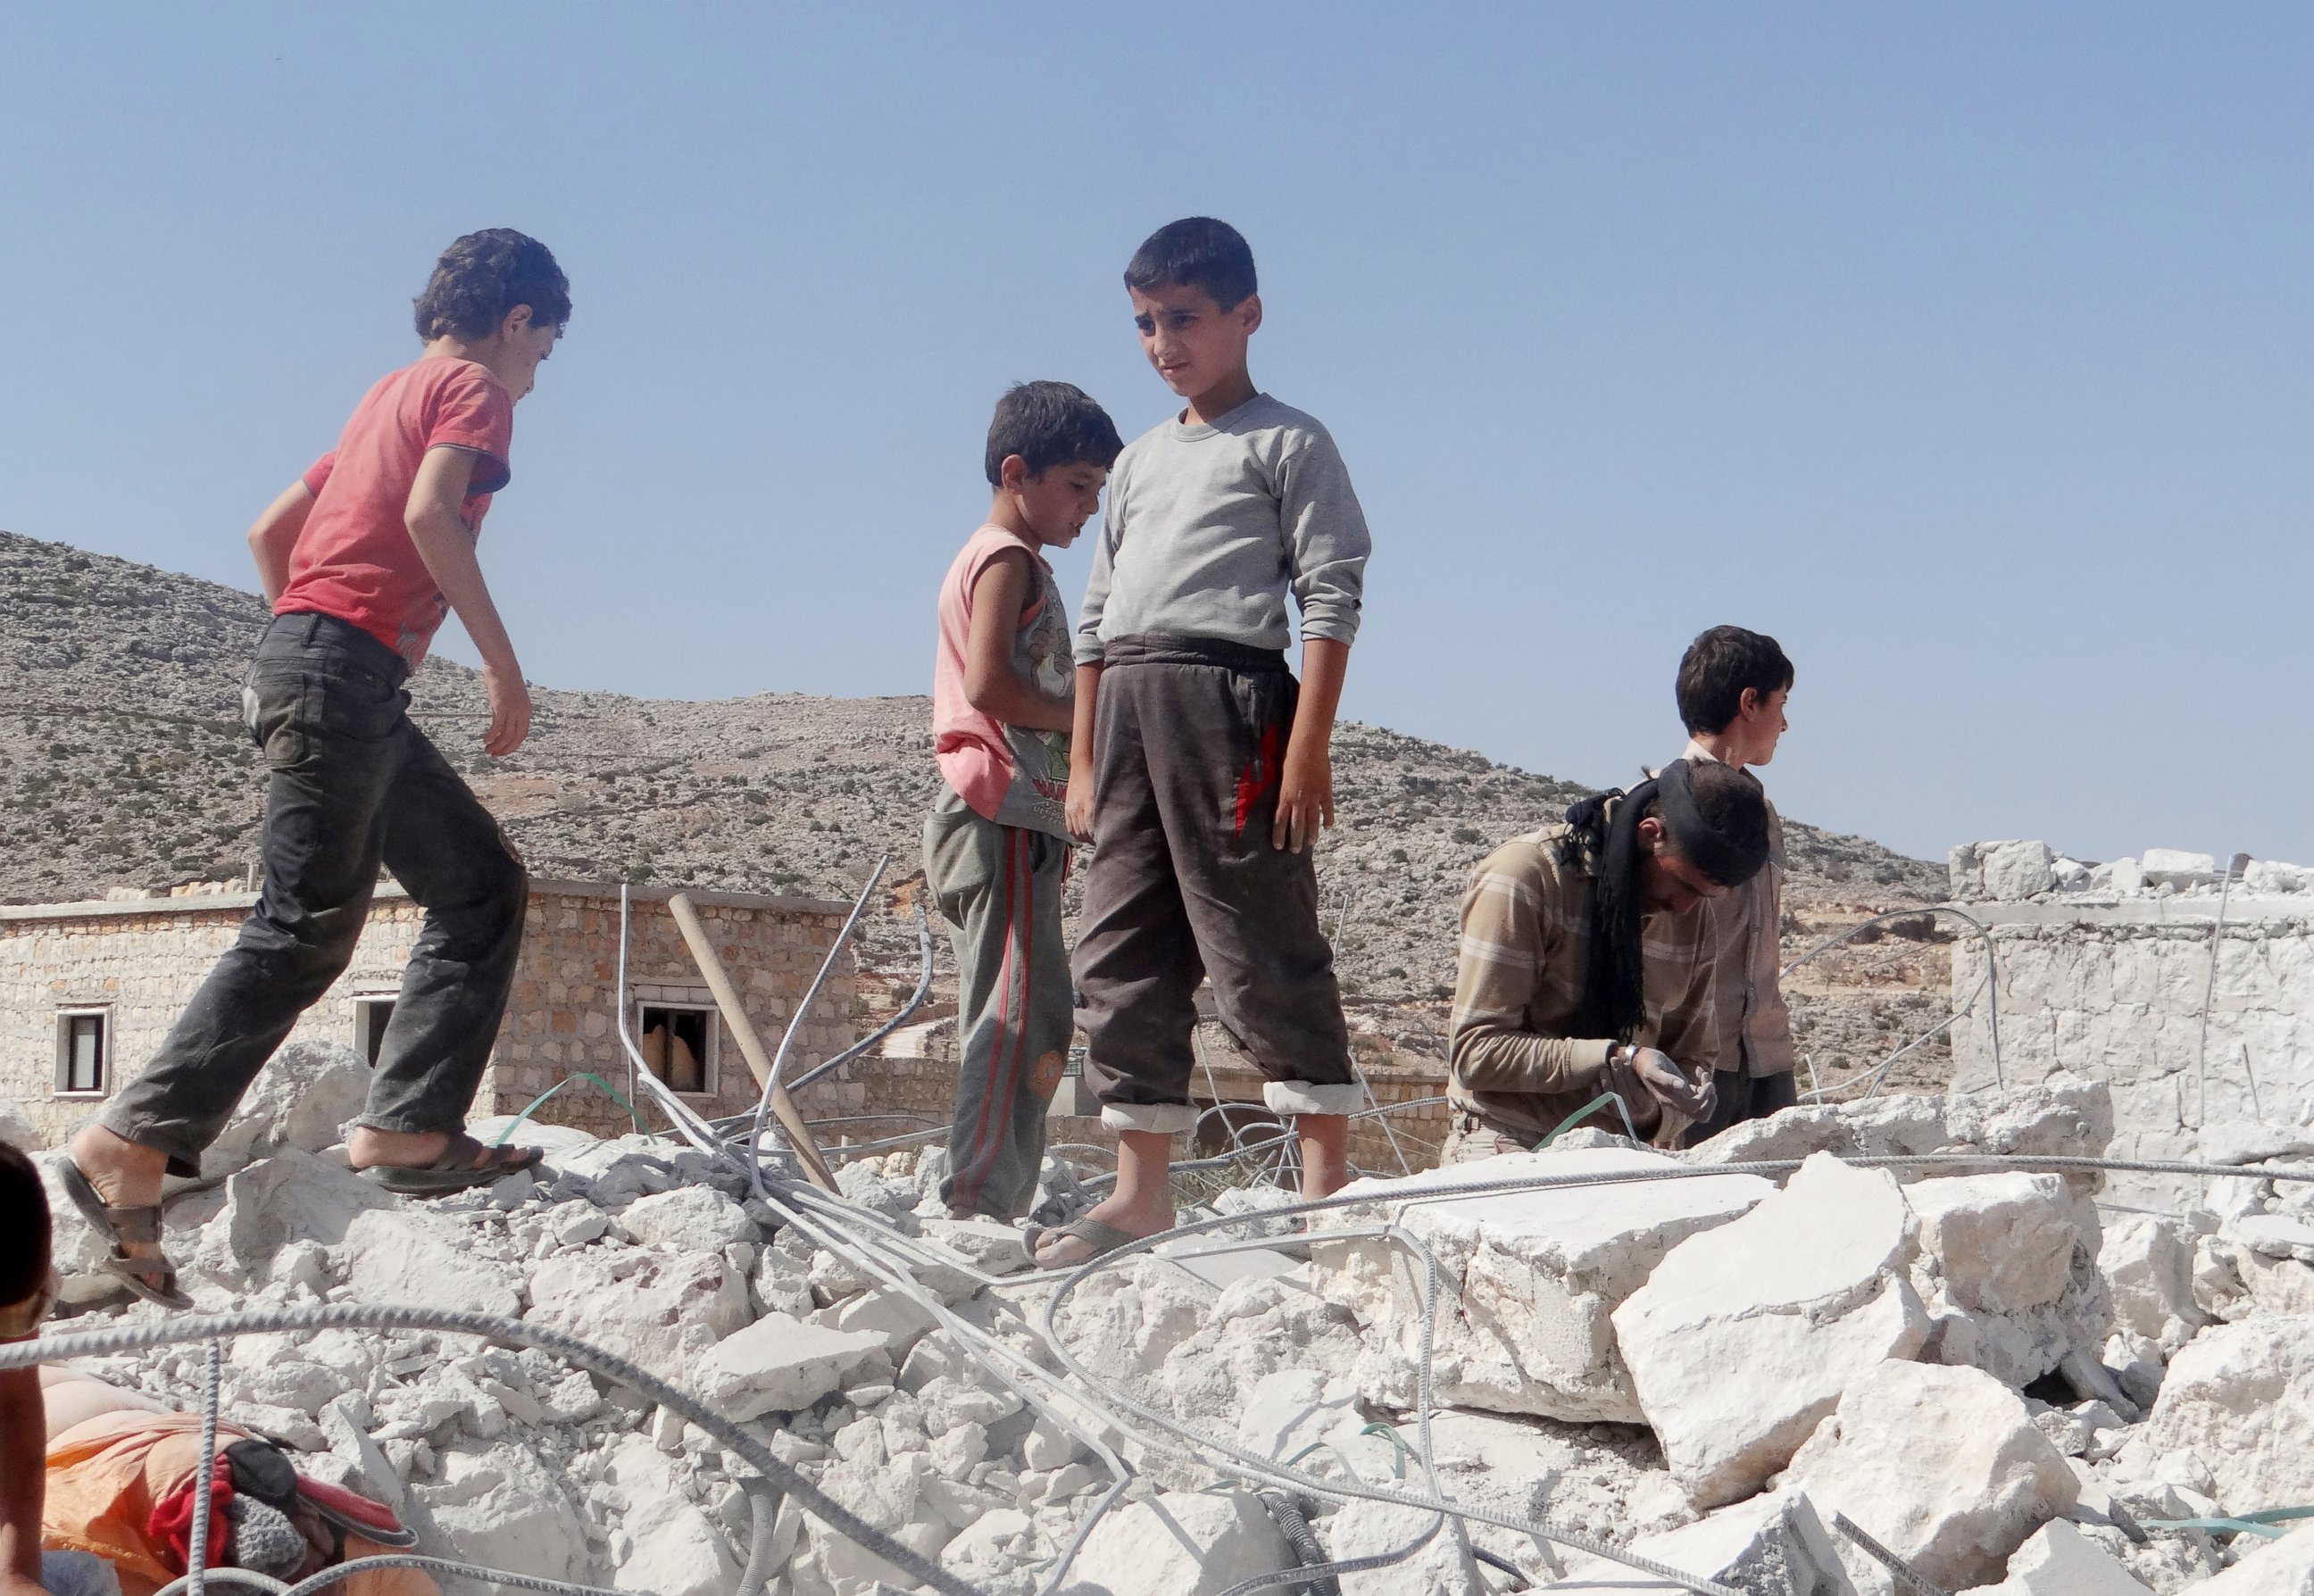 PHOTO: Syrian children collect items from the rubble of a destroyed house following the U.S.-led coalition's airstrikes in Idlib, Syria on Sept. 23, 2014.